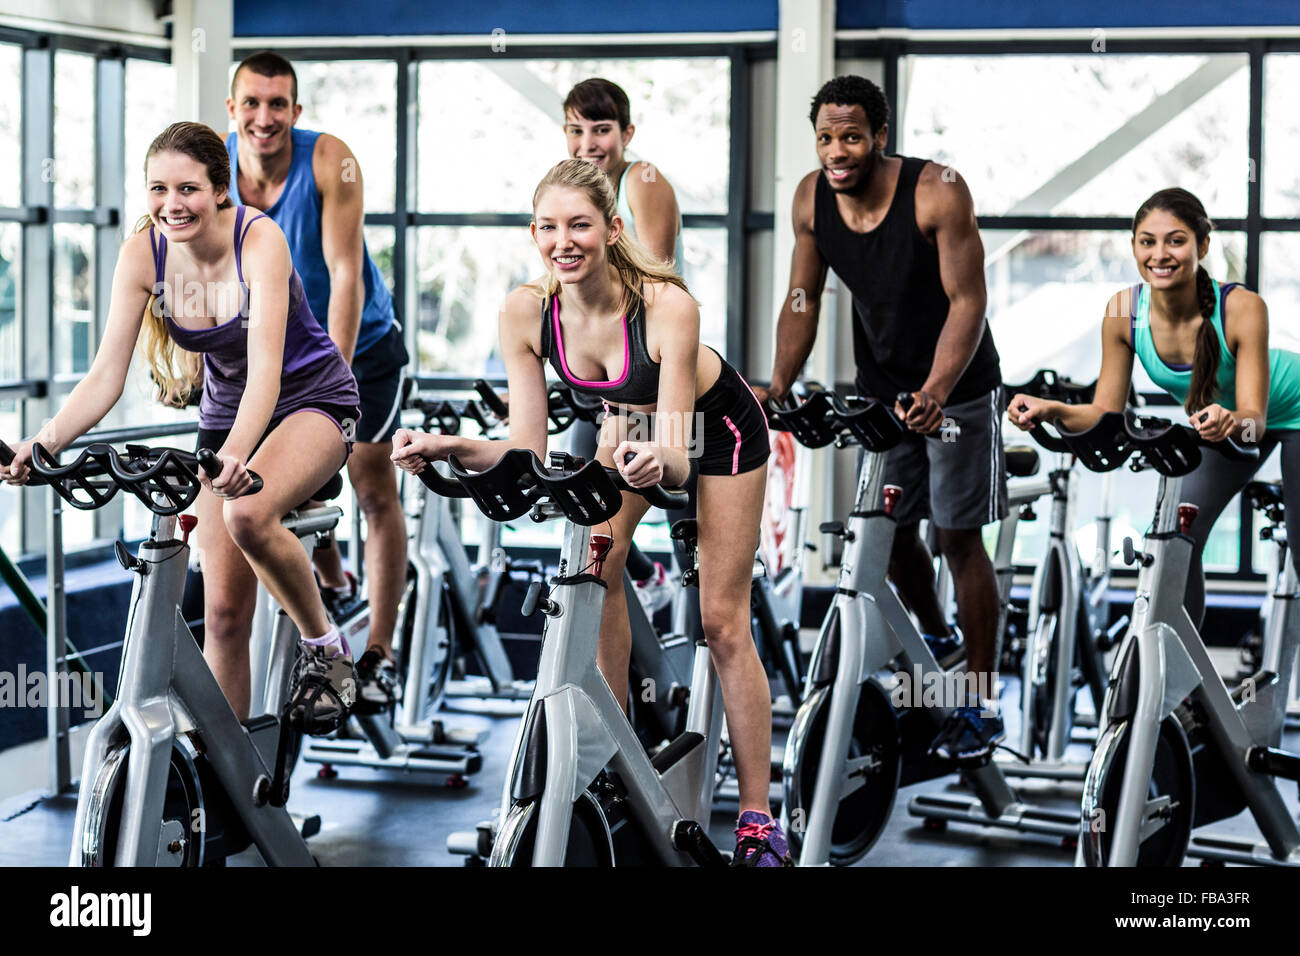 Fit people working out at spinning class Stock Photo